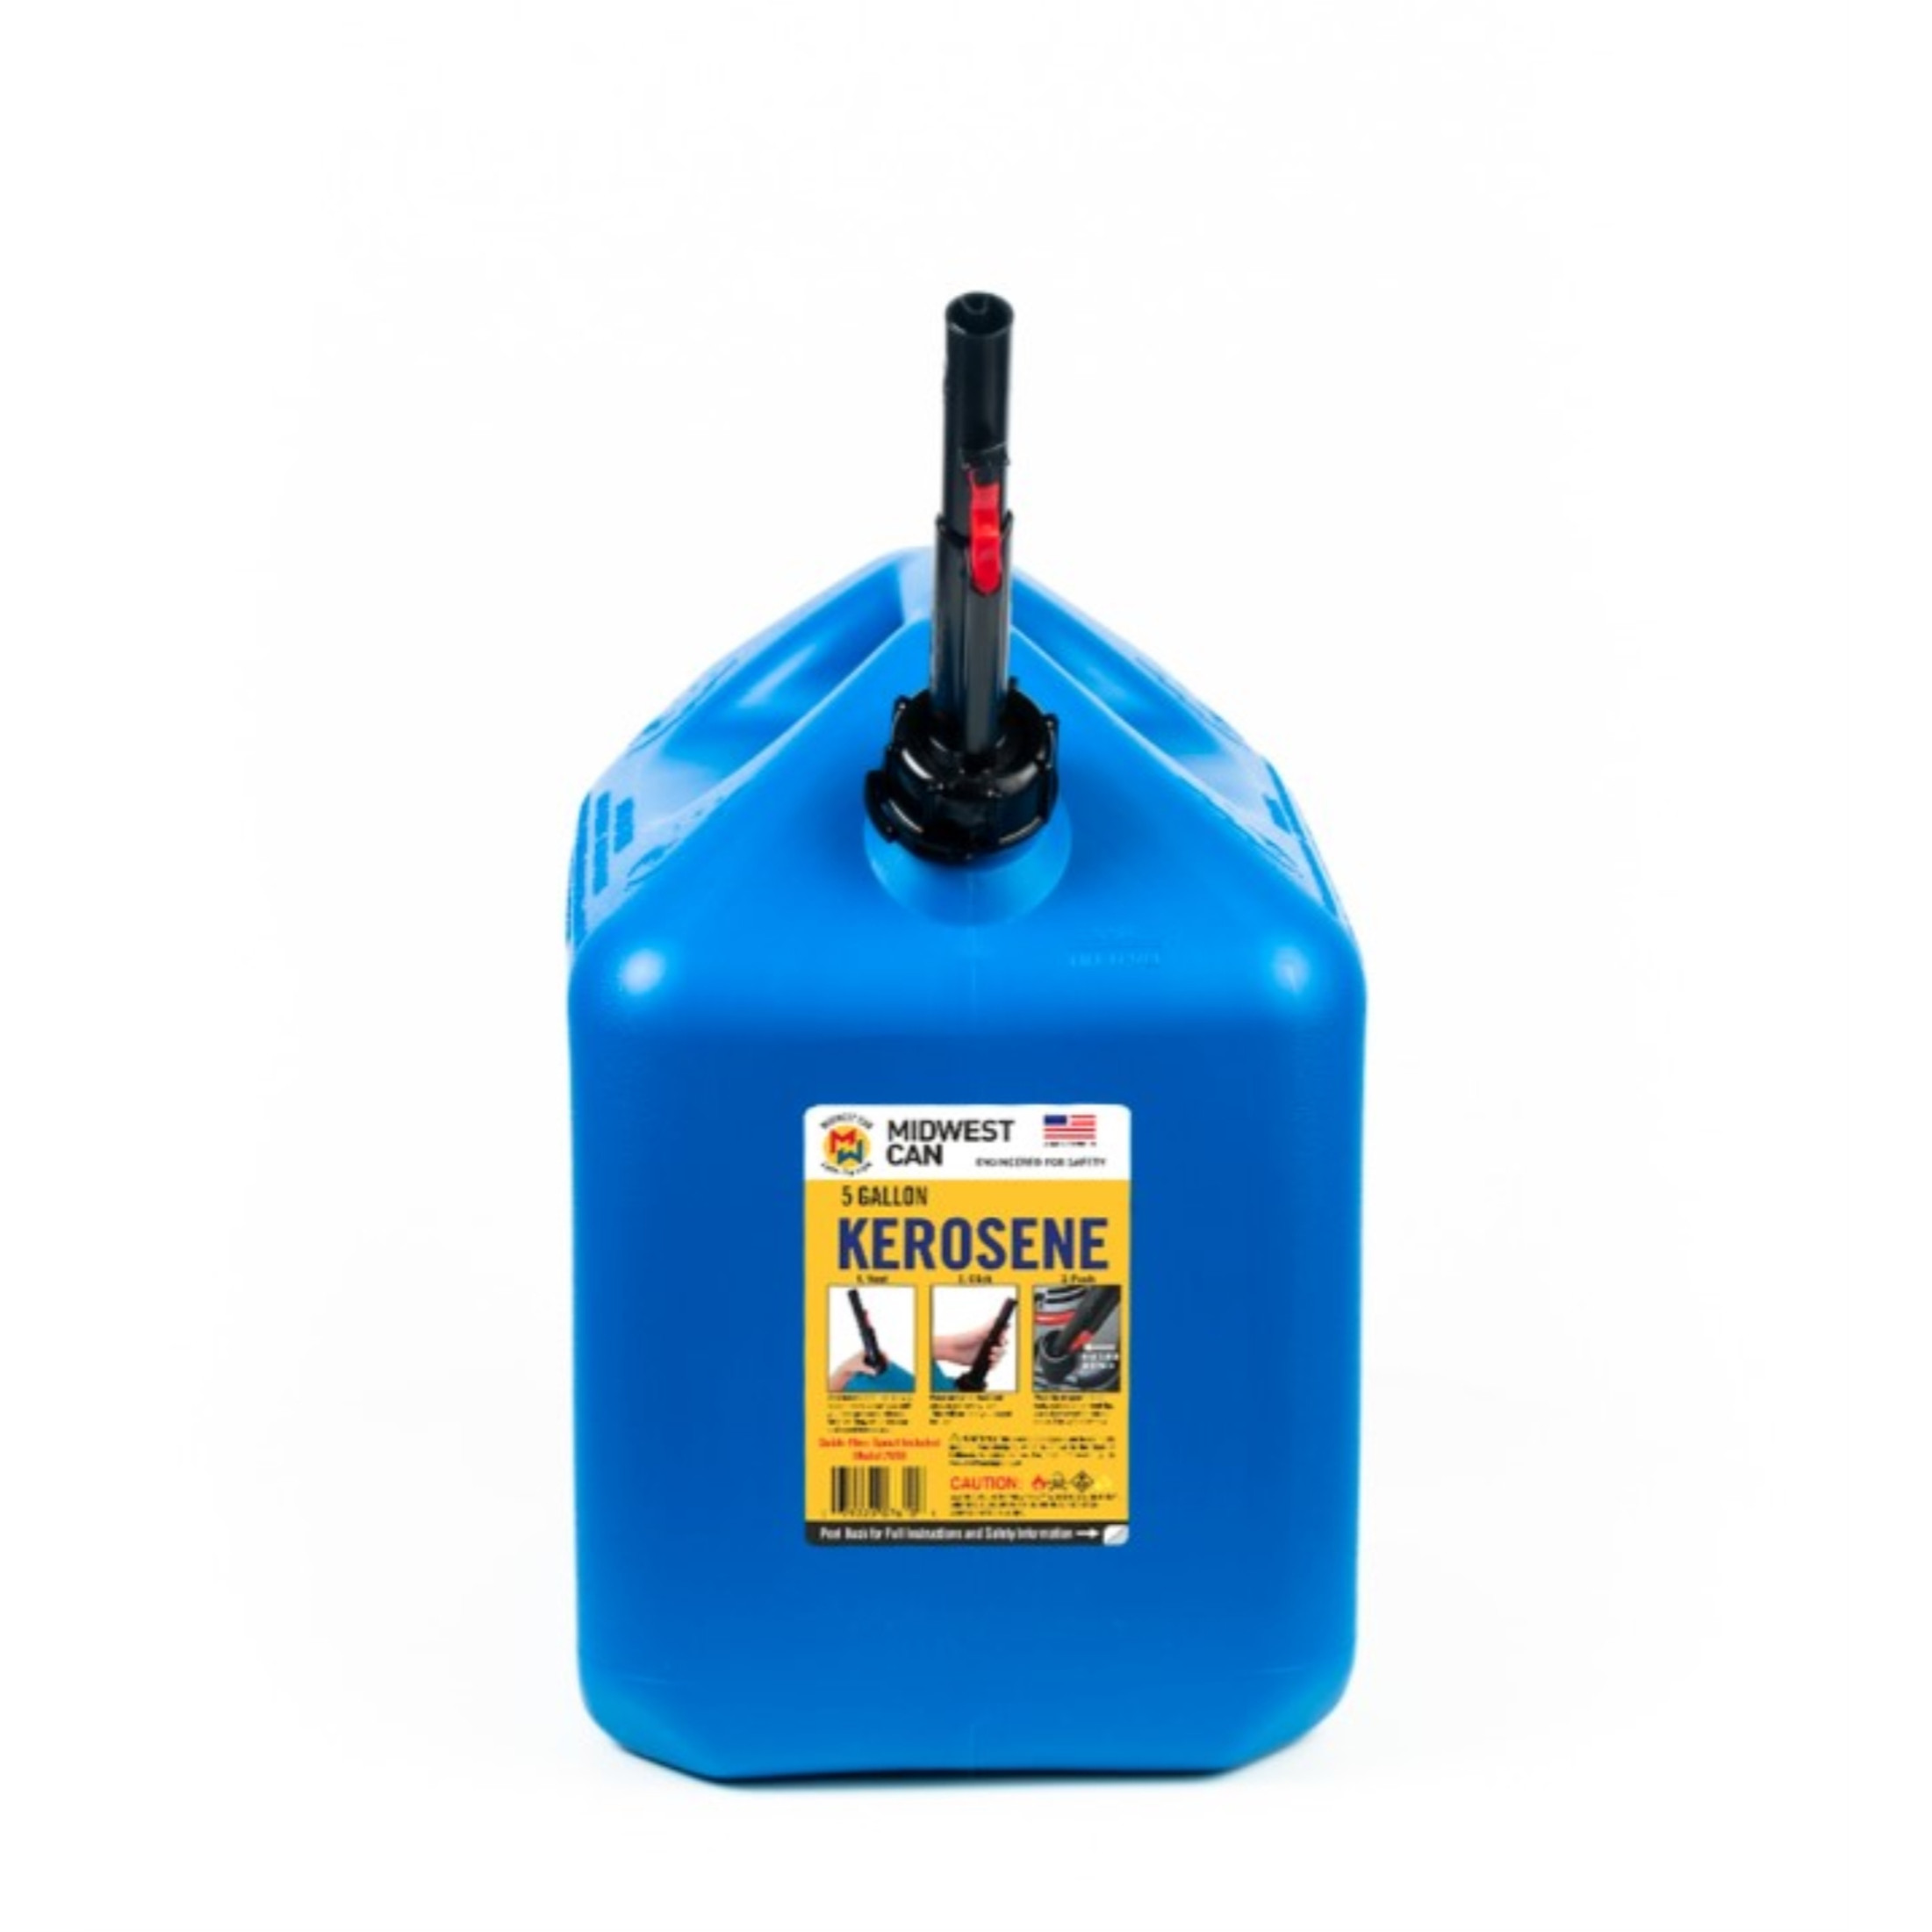 Midwest Can Kerosene Can With Flame Shield Safety System, Blue 5 Gallons